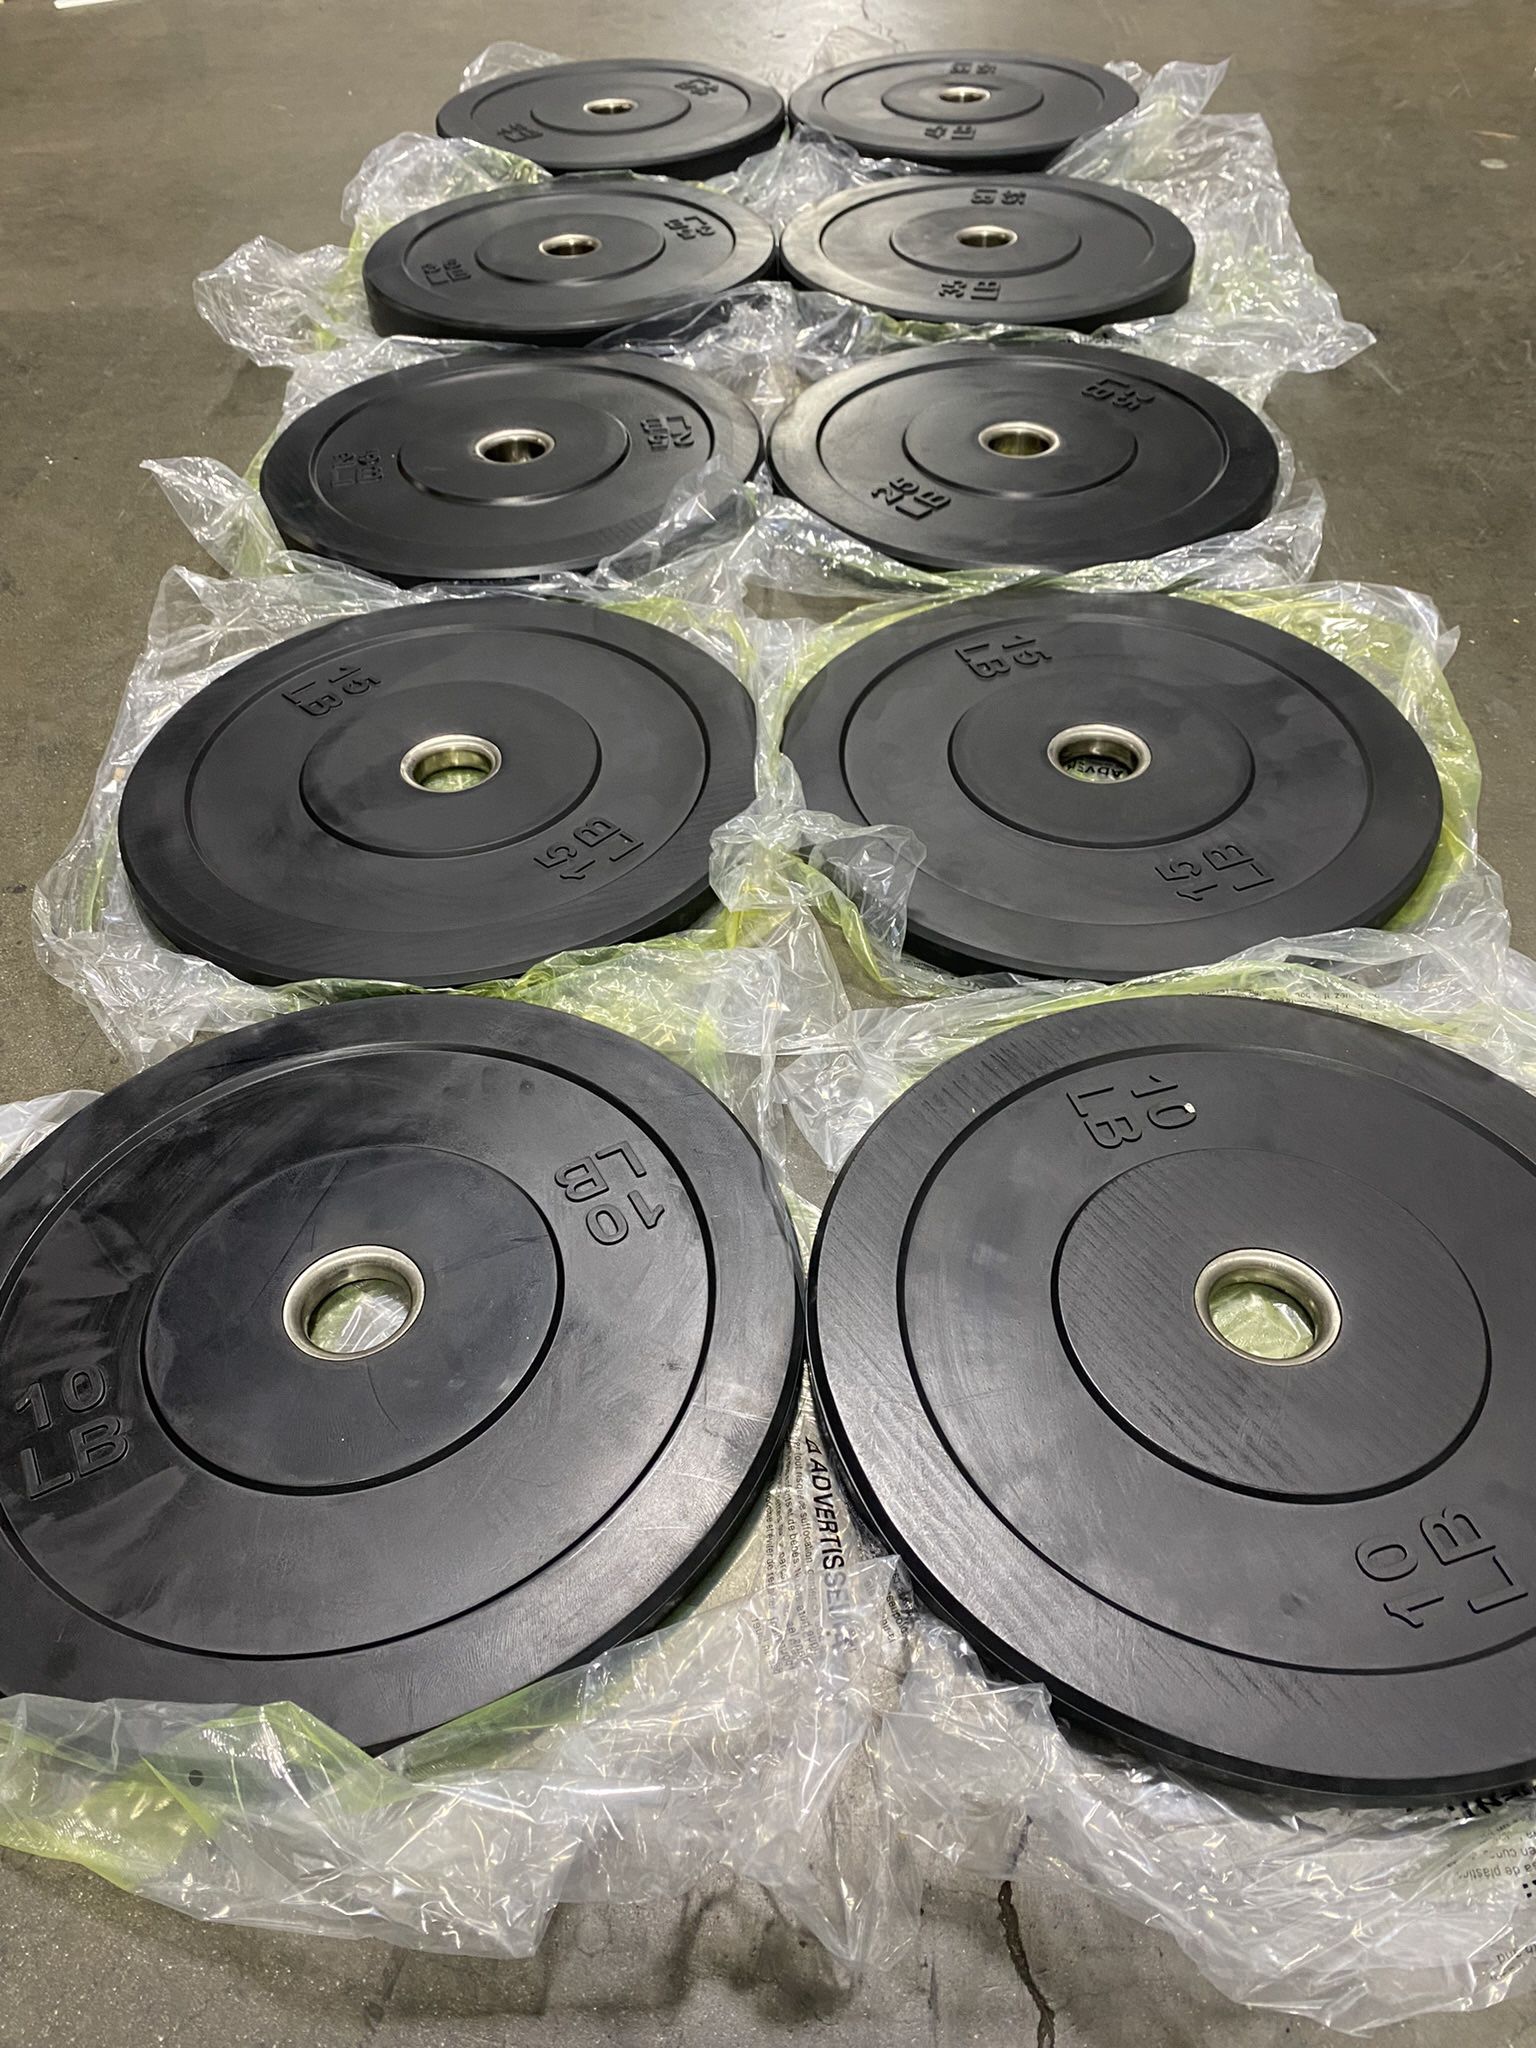 BUMPER PLATES/ RUBBER WEIGHTS/ GYM EQUIPMENT/ FREE DELIVERY 🚚 